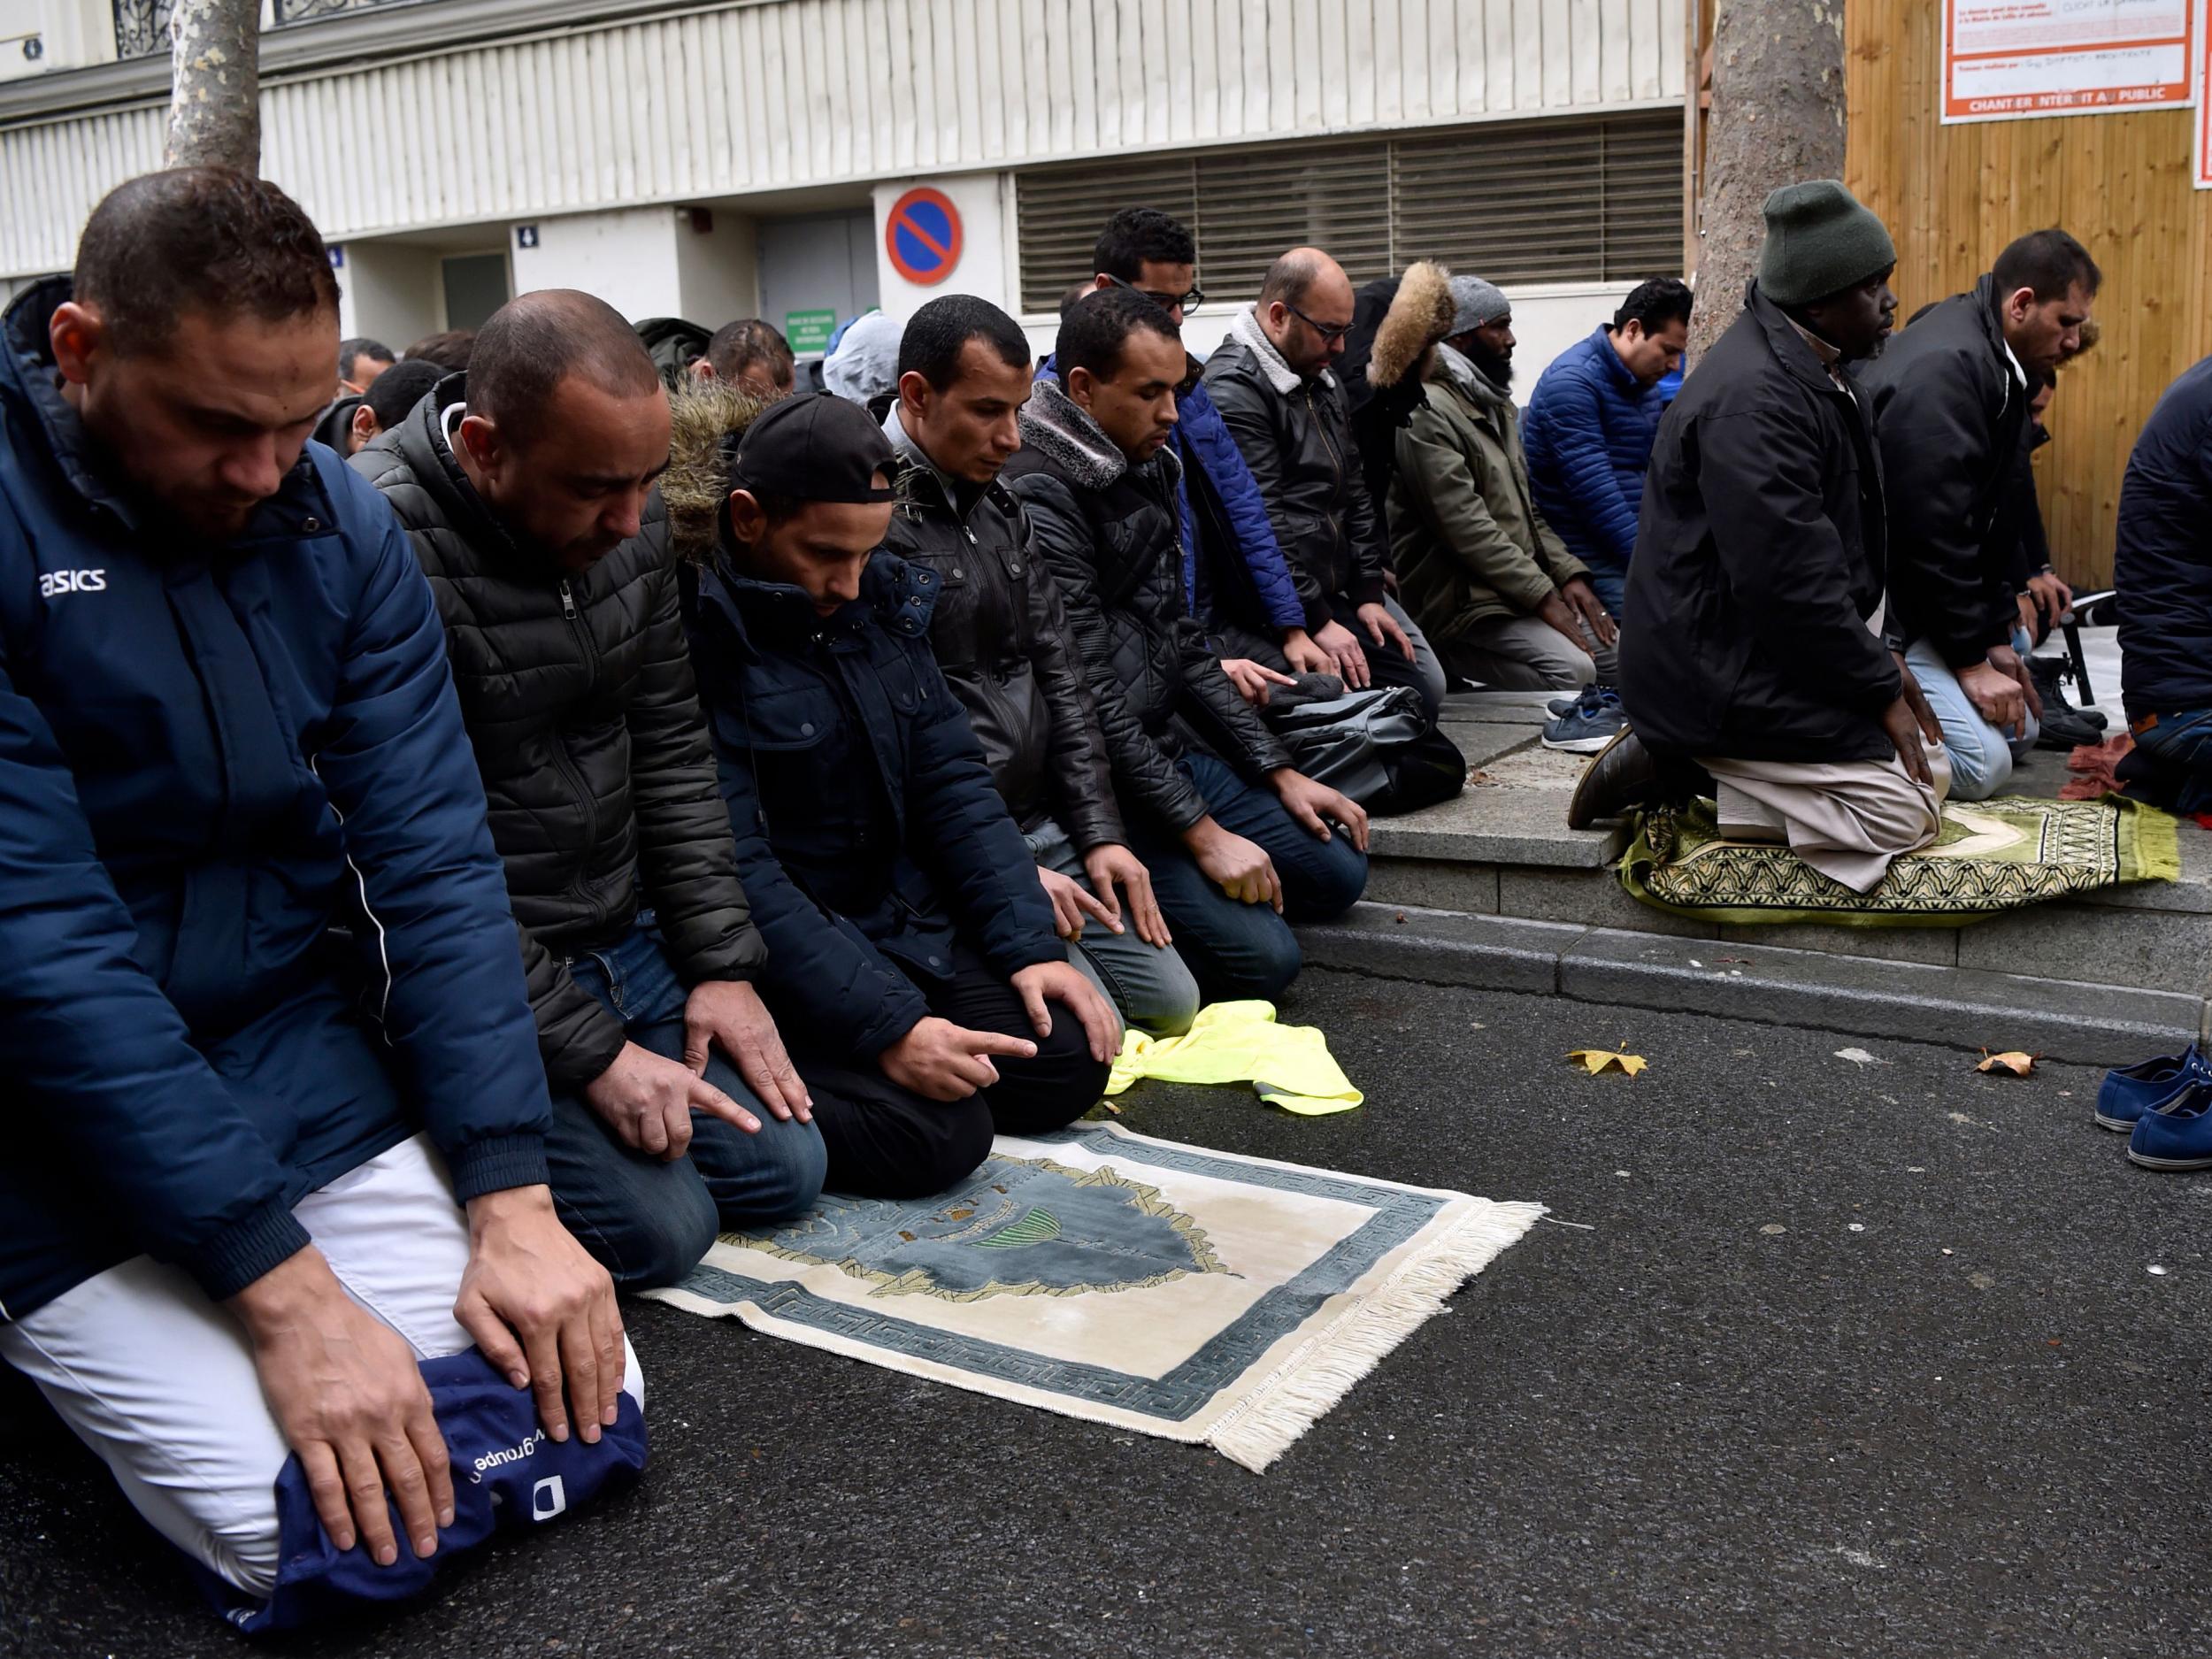 People pray in a street on 10 November in Clichy, near Paris, while the city mayor demonstrate with others political leaders against Muslim streets prayers